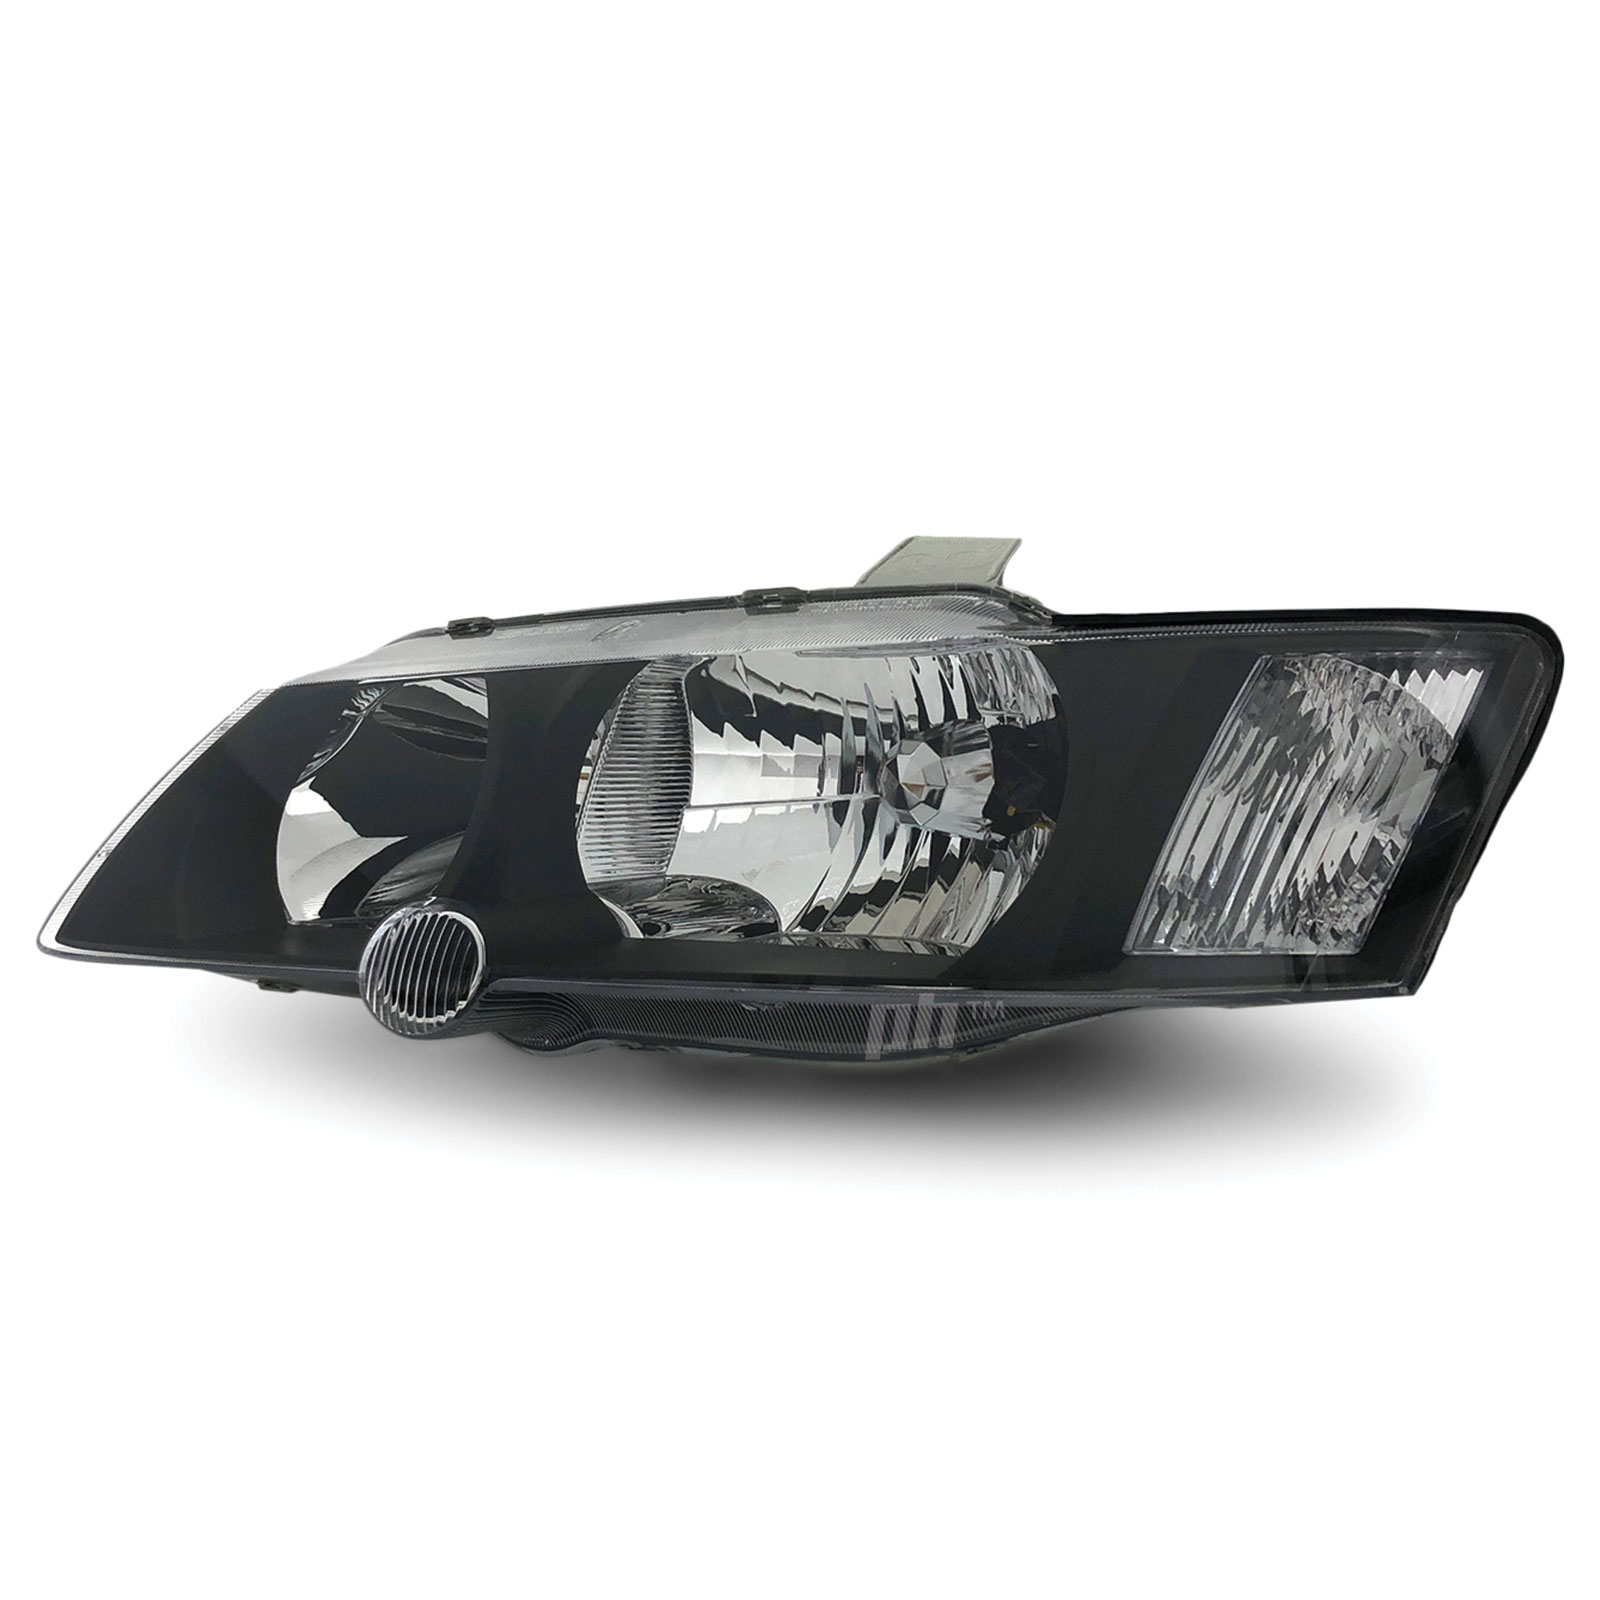 Details about  / Pair LH+RH Head Light For Holden Commodore VY SS SV8 To Fit Exe Acclaim Equipe